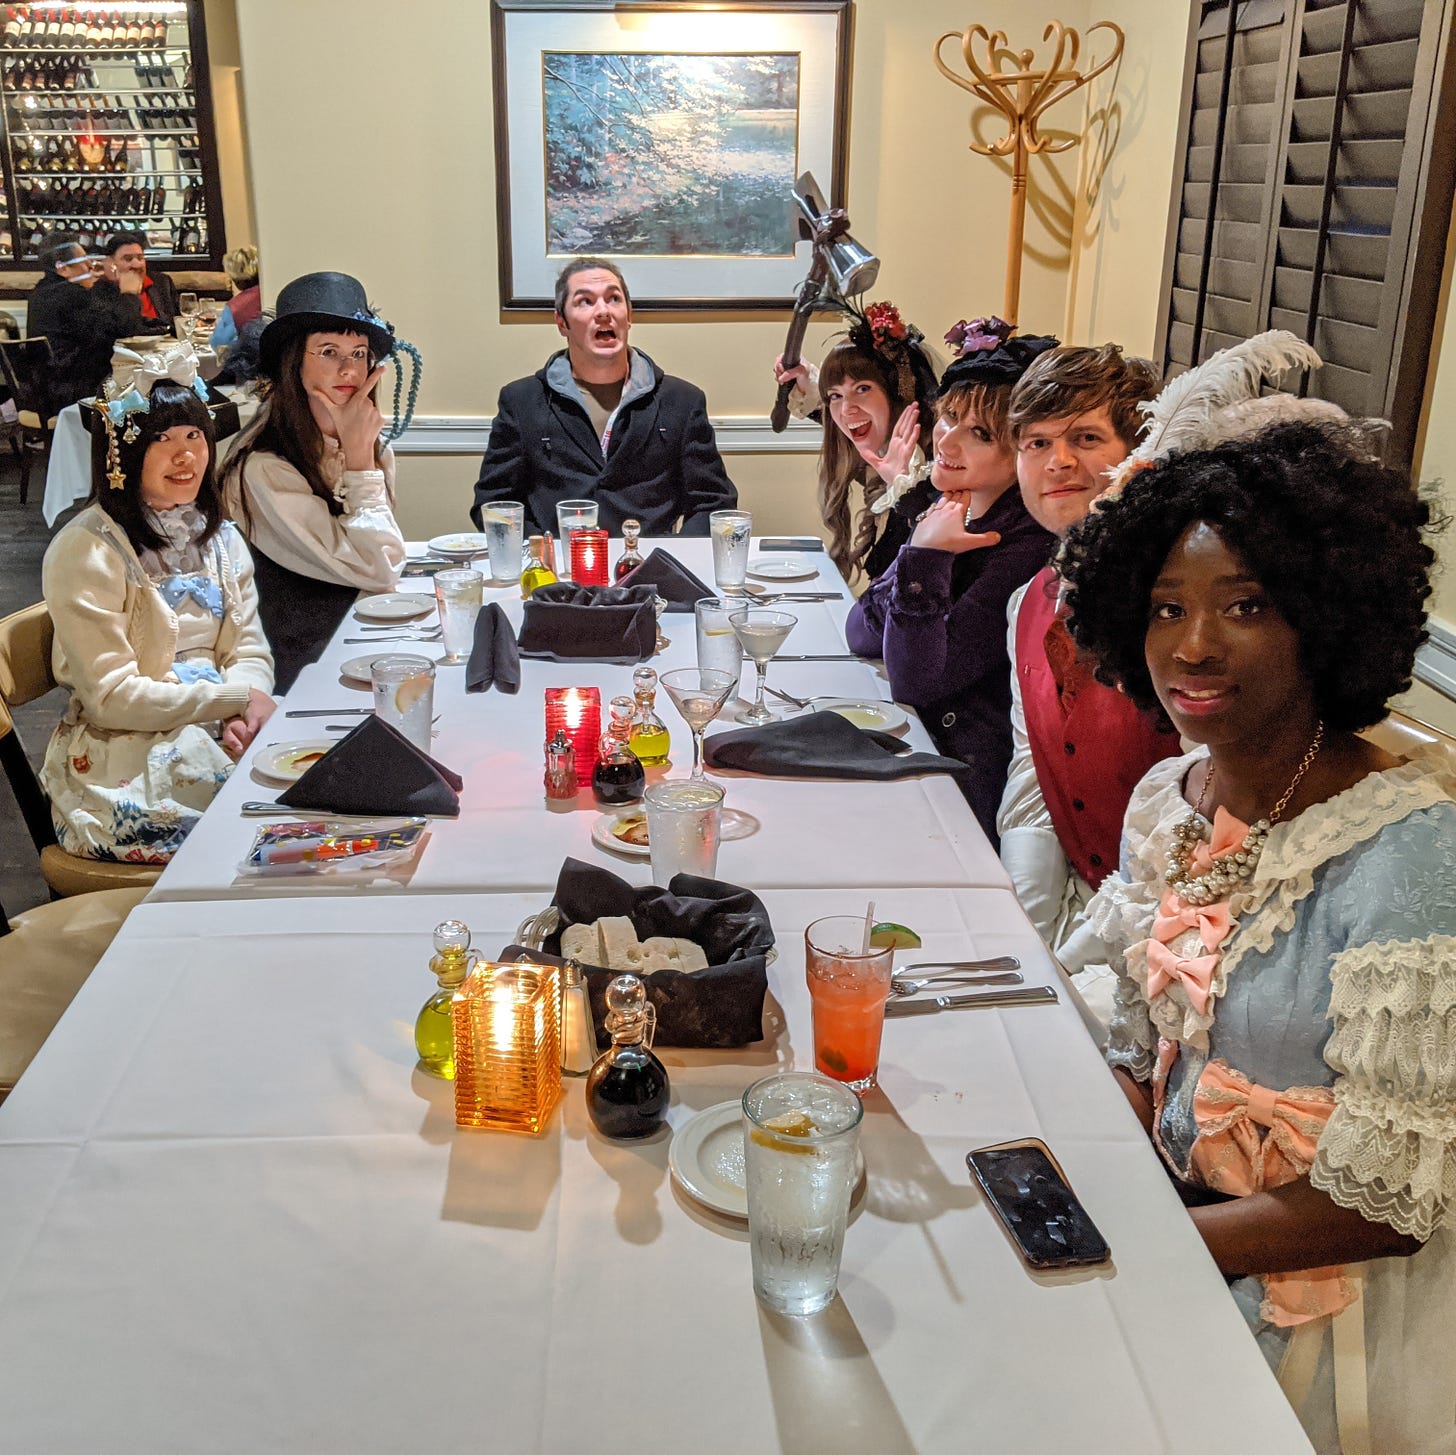 A group of Lolitas and their partners sitting around a dinner table, wearing various OTT and Ouji looks. They are smiling at the camera and goofing off.